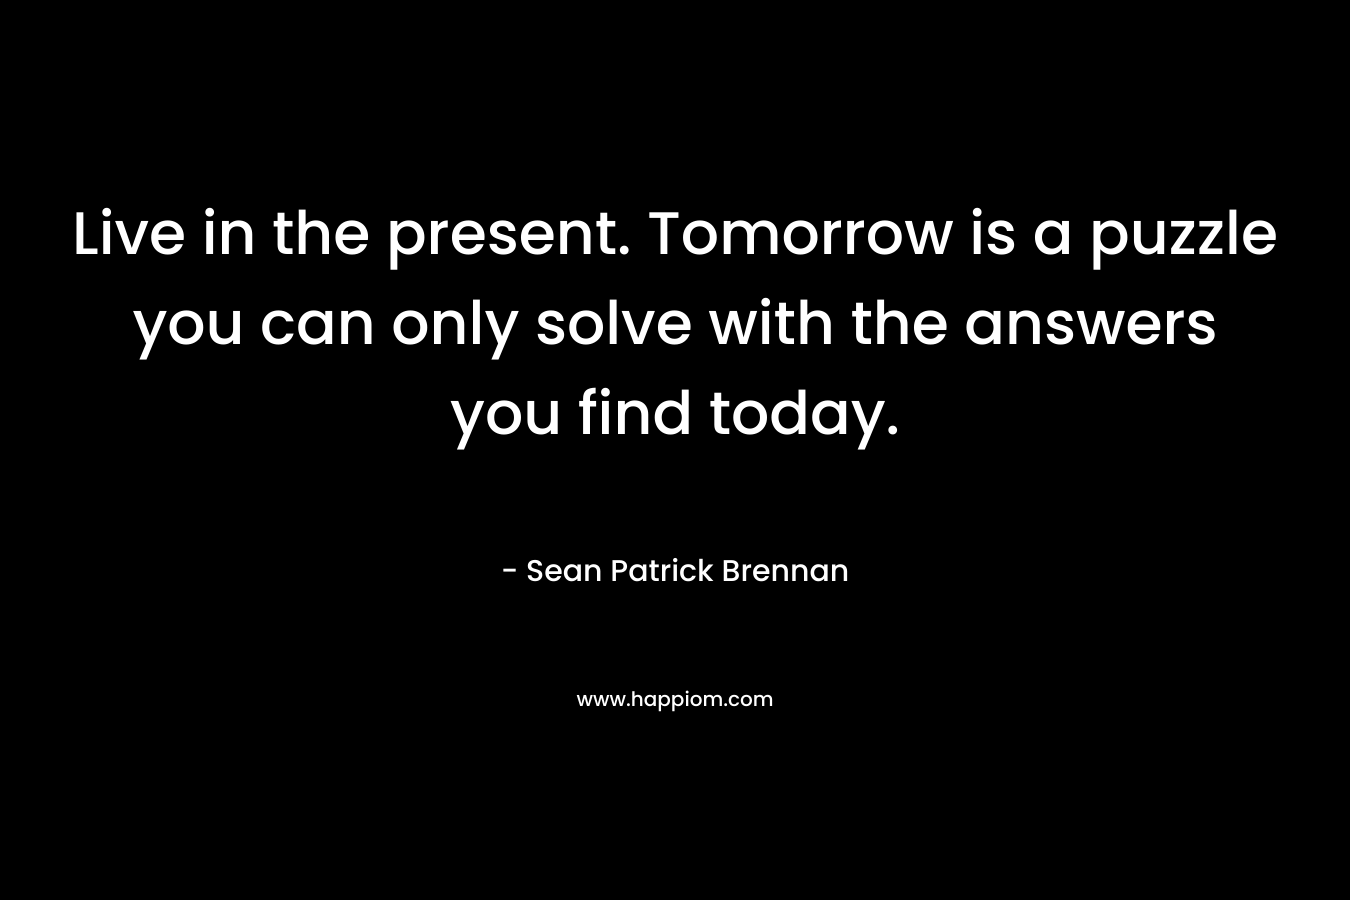 Live in the present. Tomorrow is a puzzle you can only solve with the answers you find today. – Sean Patrick Brennan